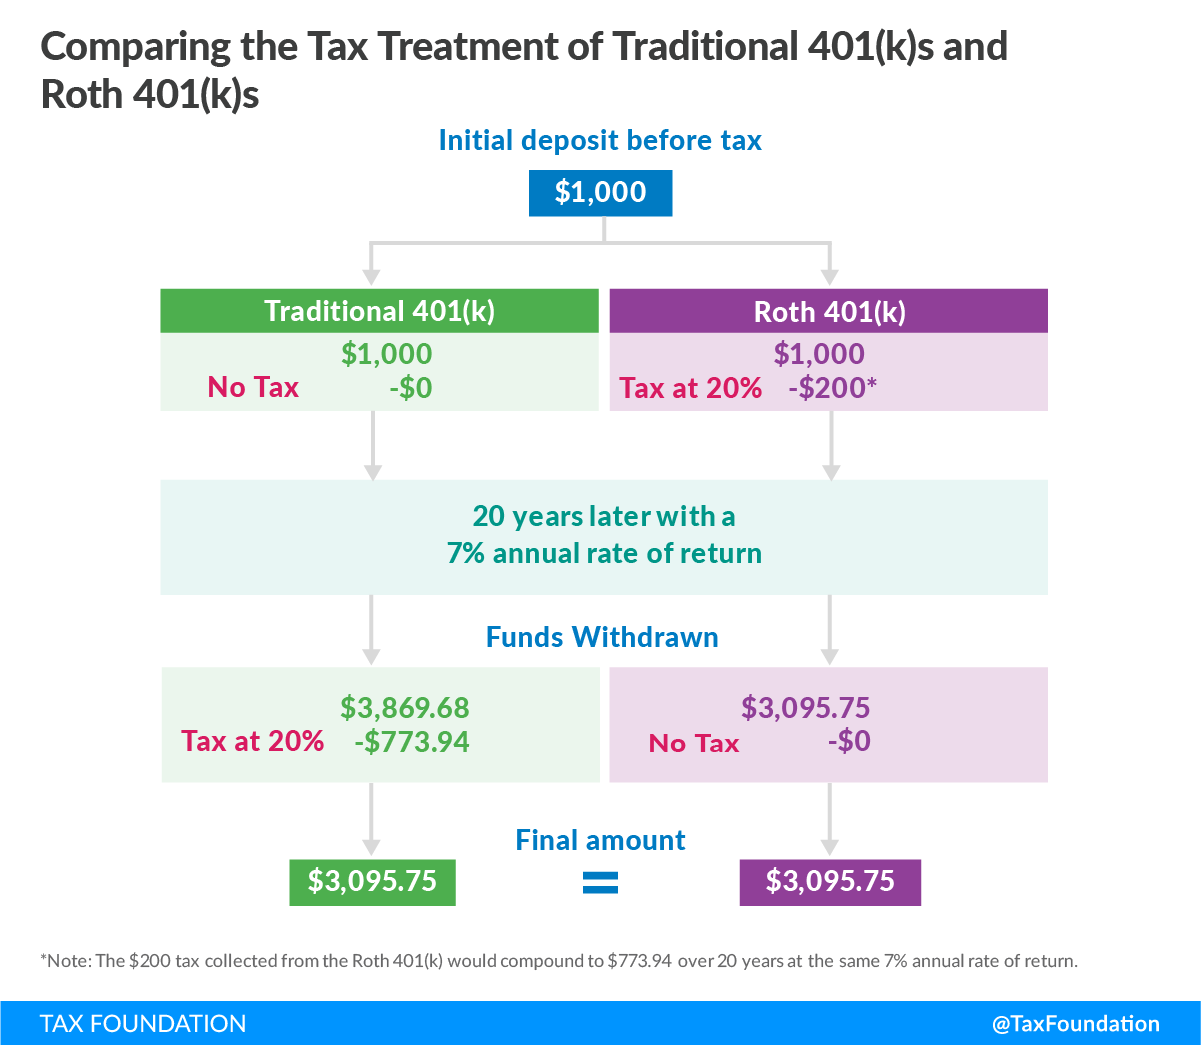 Comparing tax treatment of traditional 401k and roth 401k. Universal savings accounts, savings, investment, retirement